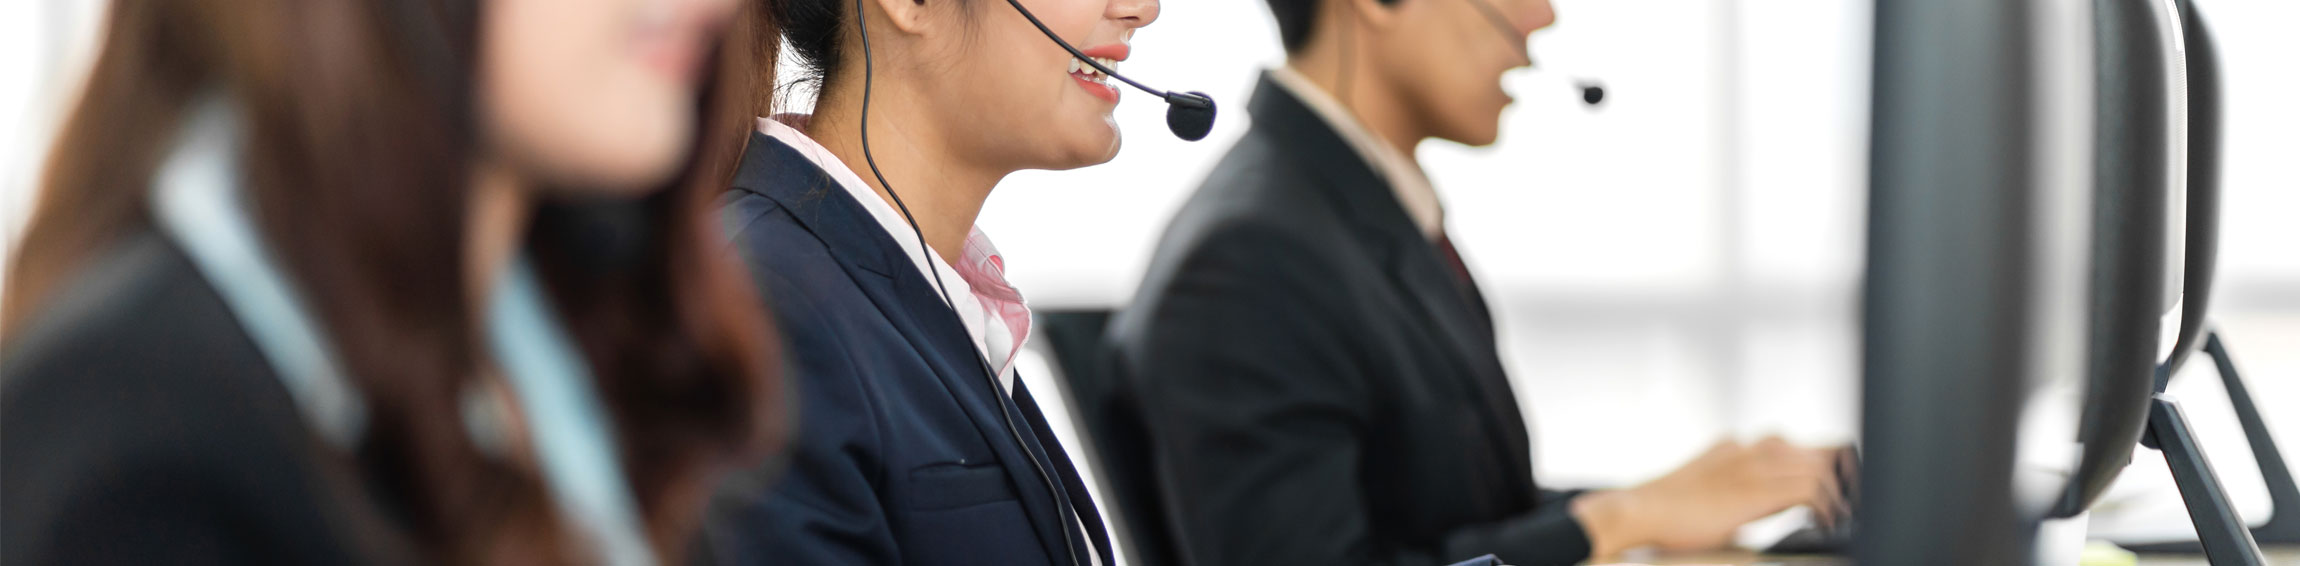 5 Things Agile Call Centers Do Differently